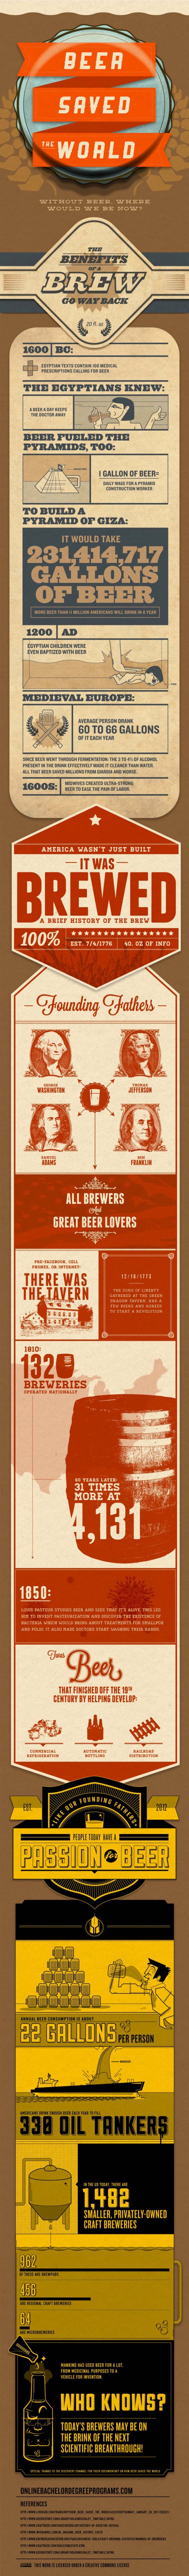 Beer Saved The World Infographic